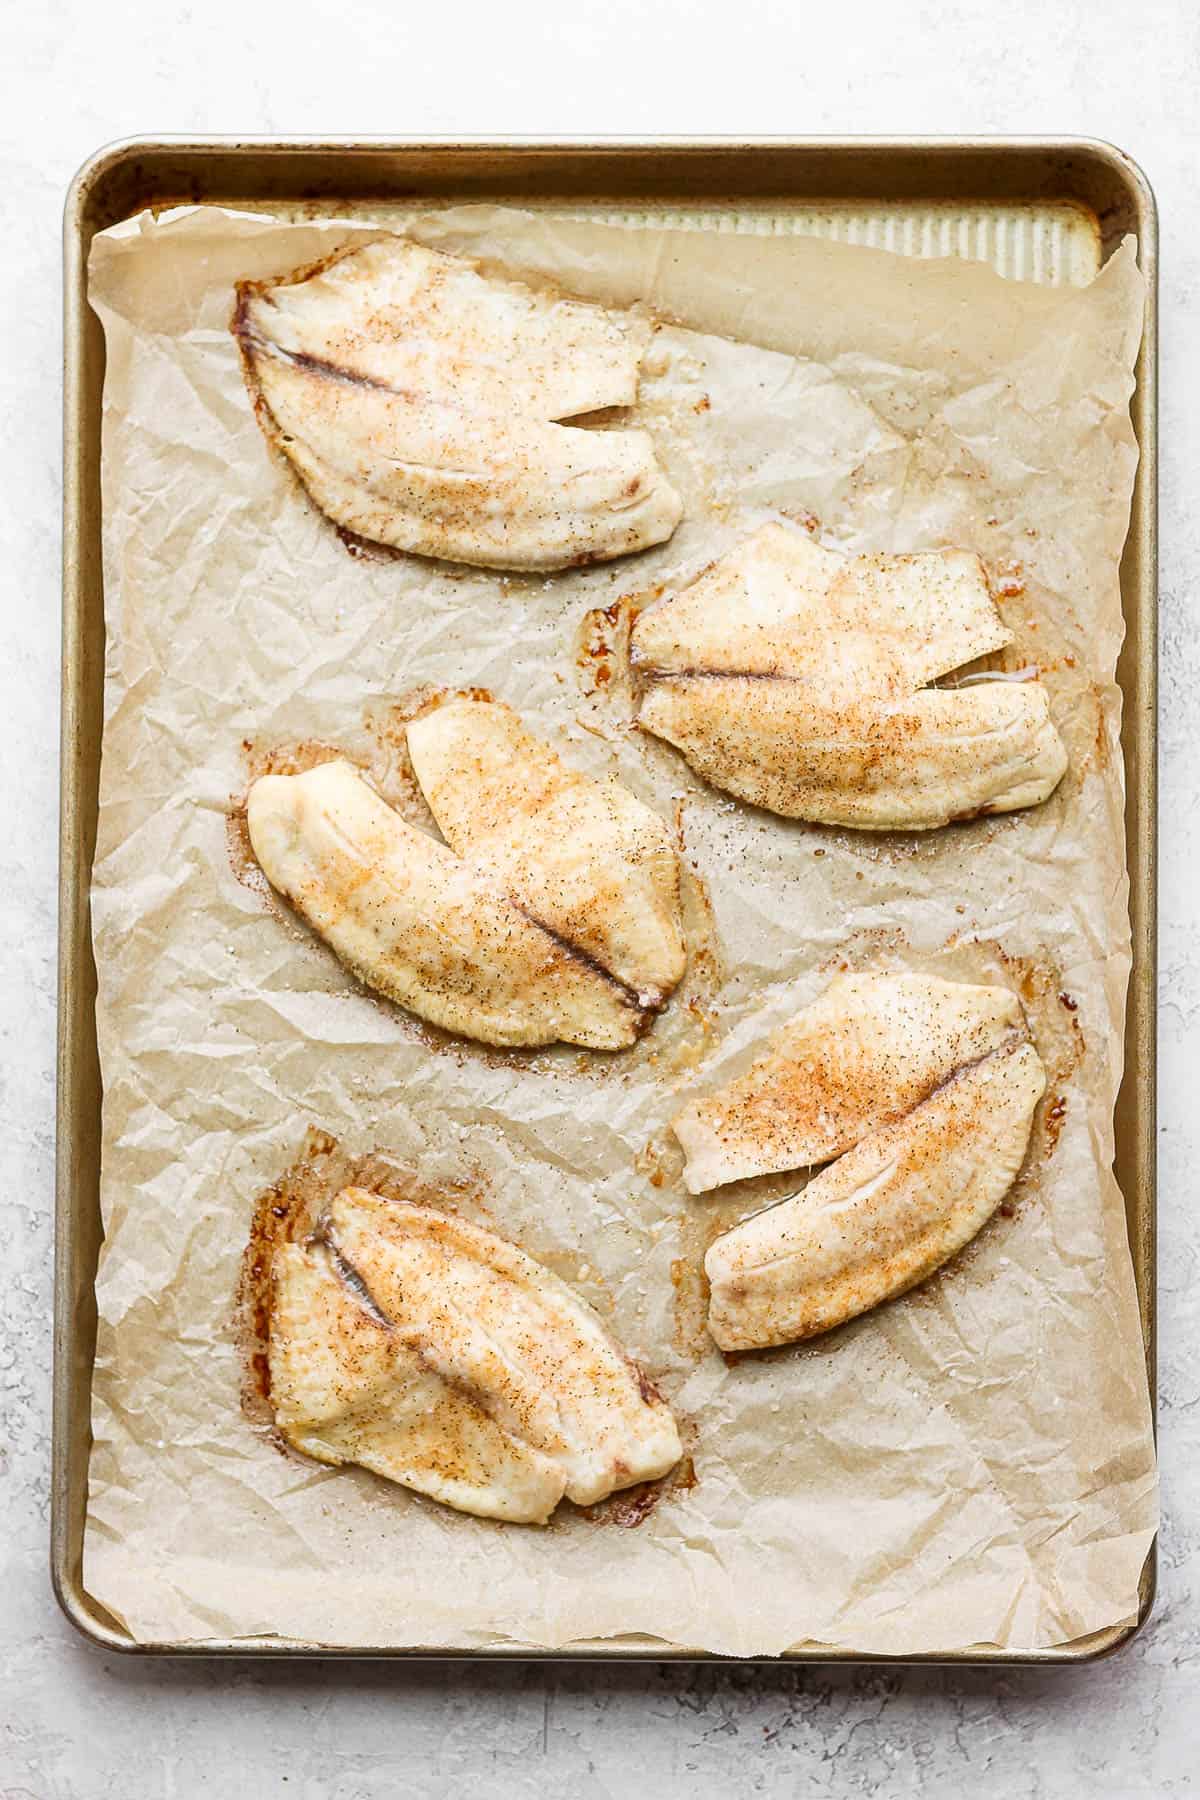 Baked tilapia fillets on a parchment-lined baking sheet.